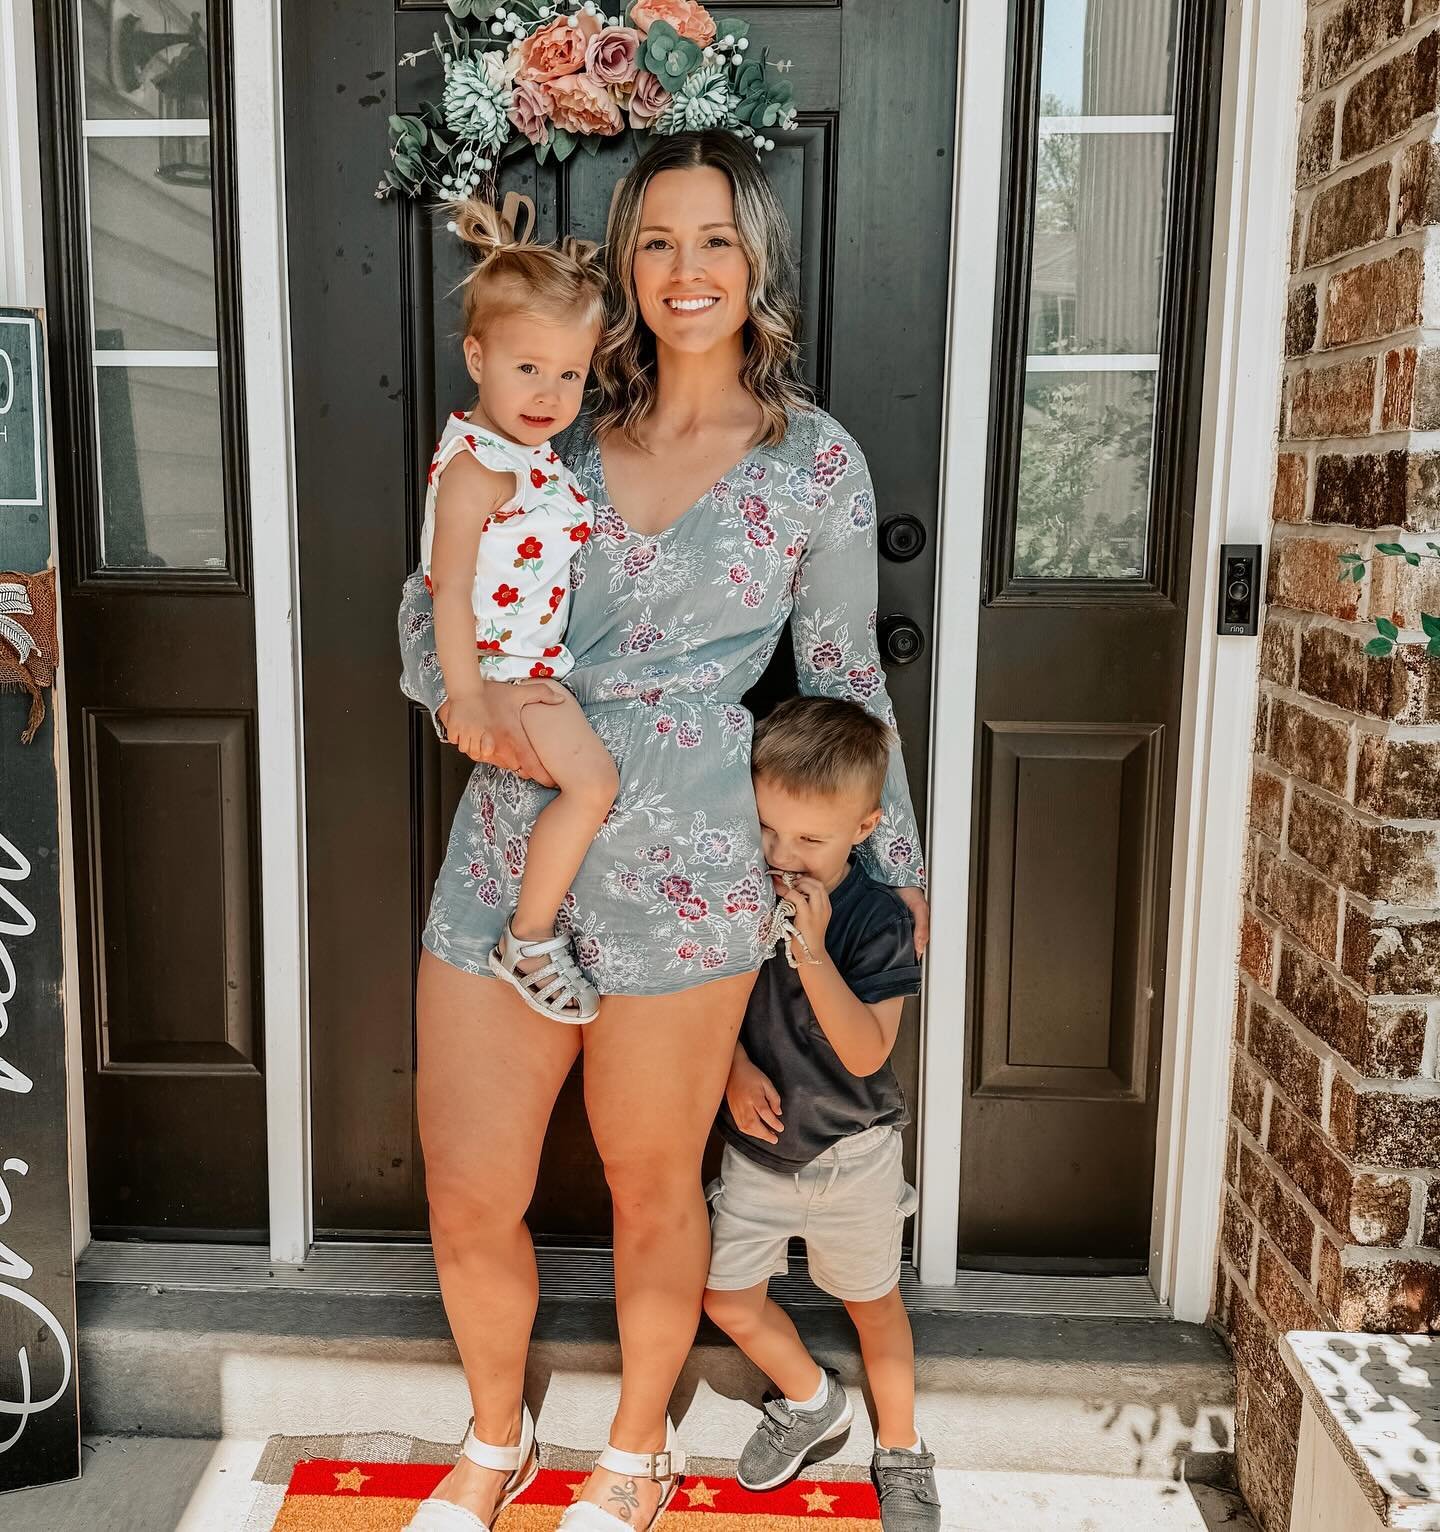 I thank God every day for these two beautiful blessings in my life and that He chose me to be their momma.

The days are long, sometimes I question if I&rsquo;m doing it all right, there are days I want nothing more than a break&hellip;

But my life 